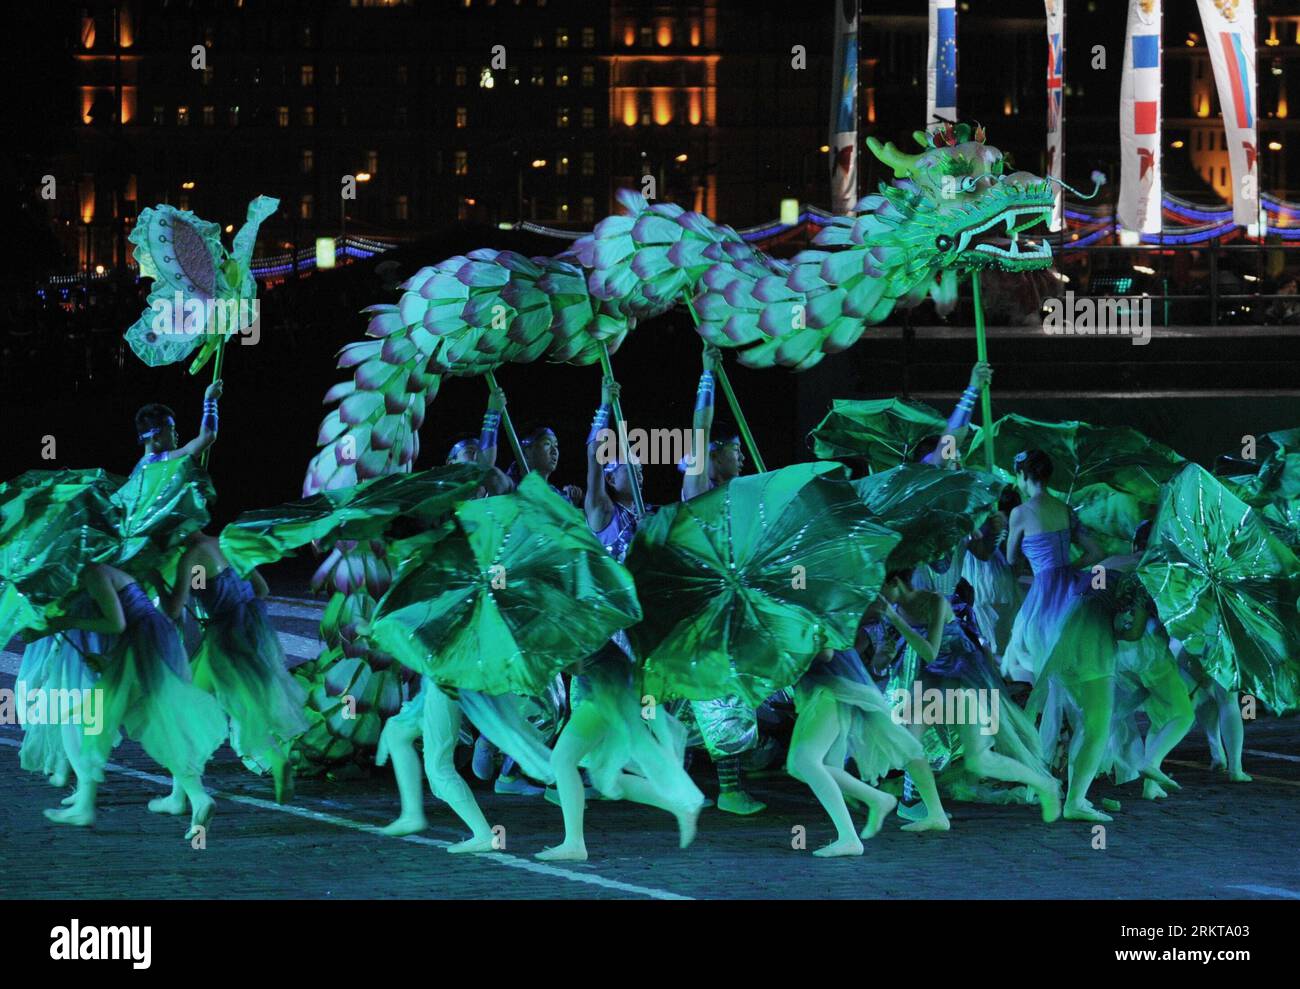 Bildnummer: 58416194  Datum: 01.09.2012  Copyright: imago/Xinhua  MOSCOW,  2012 (Xinhua) -- Members of a team from Changxing County, east China s Zhejiang Province, perform a dragon dance during the International Military Music Festival at Red Square in Moscow, on Sept. 1, 2012. Military bands from different countries participate in the annual tattoo. (Xinhua/Pavel) (lr) RUSSIA-MOSCOW-INTERNATIONAL MILITARY MUSIC FESTIVAL PUBLICATIONxNOTxINxCHN Gesellschaft Militär Musik Militärmusik Musikfestival Militärmusikfestival xas x0x premiumd 2012 quer     58416194 Date 01 09 2012 Copyright Imago XINH Stock Photo